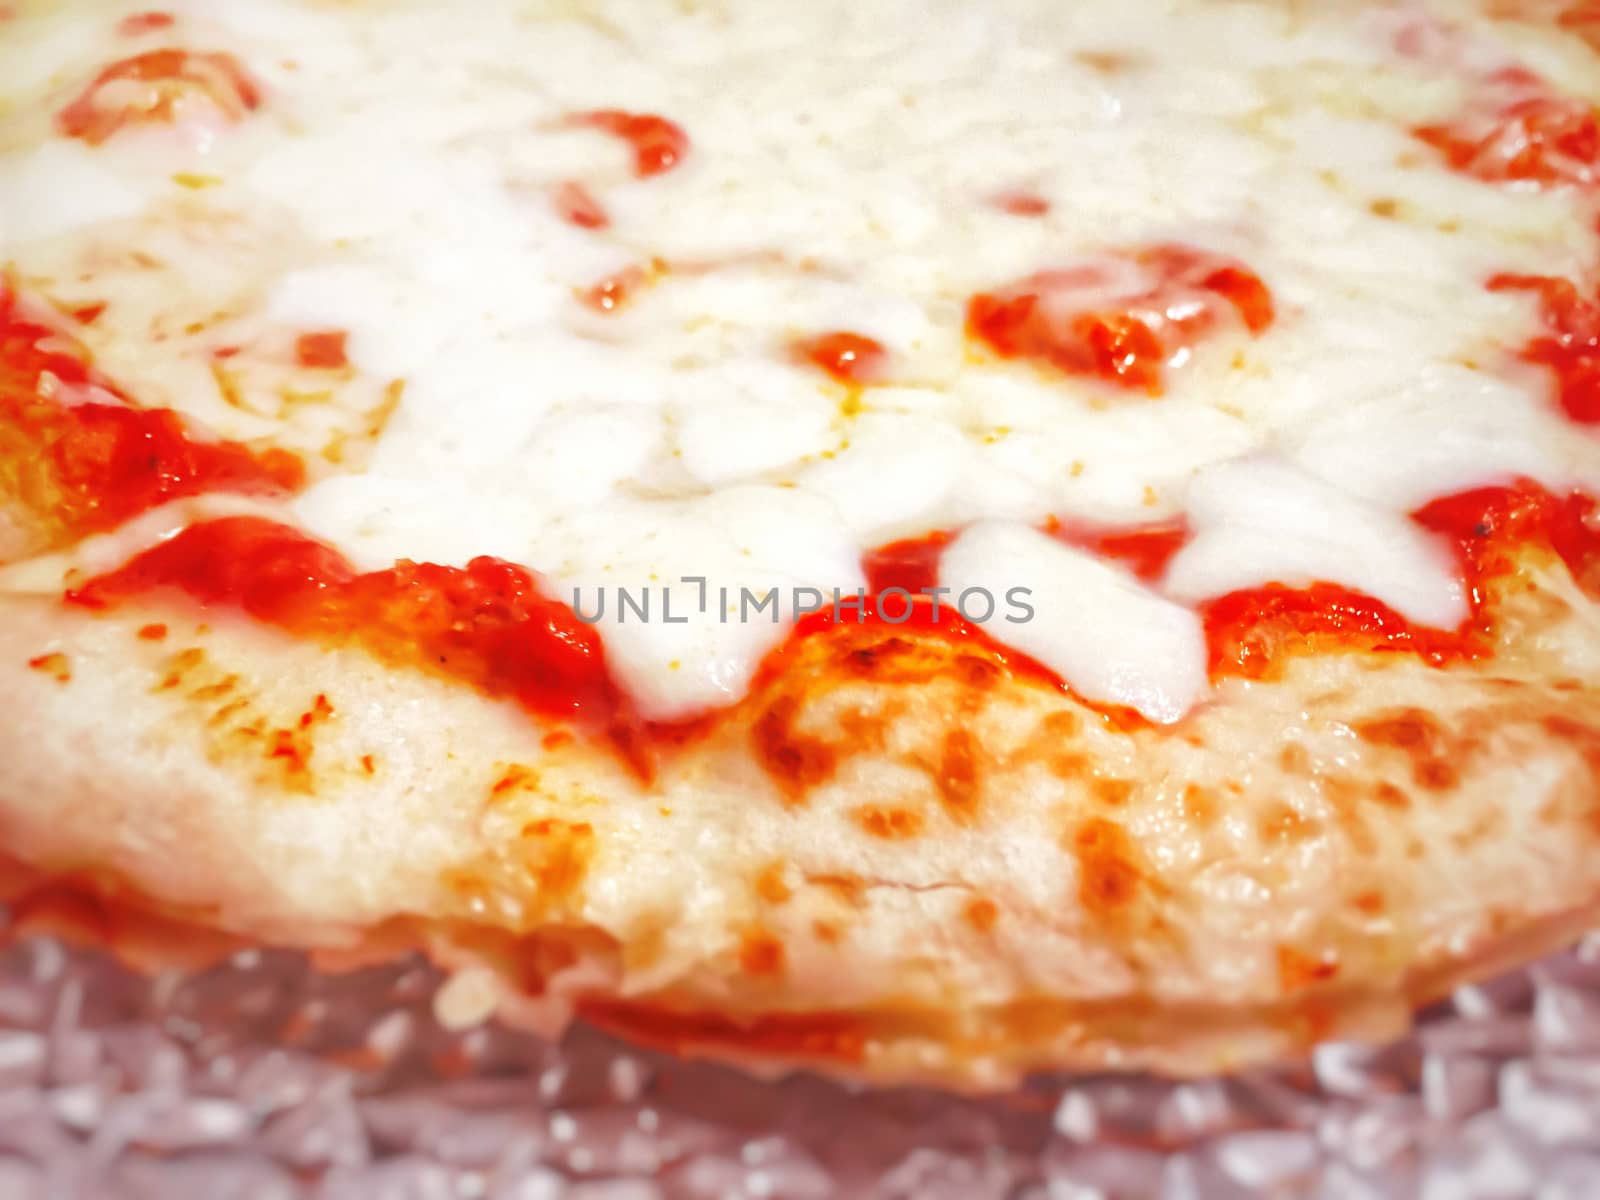 detail of a margherita pizza topped with tomato sauce and mozzarella cheese with crispy crust. Traditional Italian recipe. Typical Neapolitan cuisine